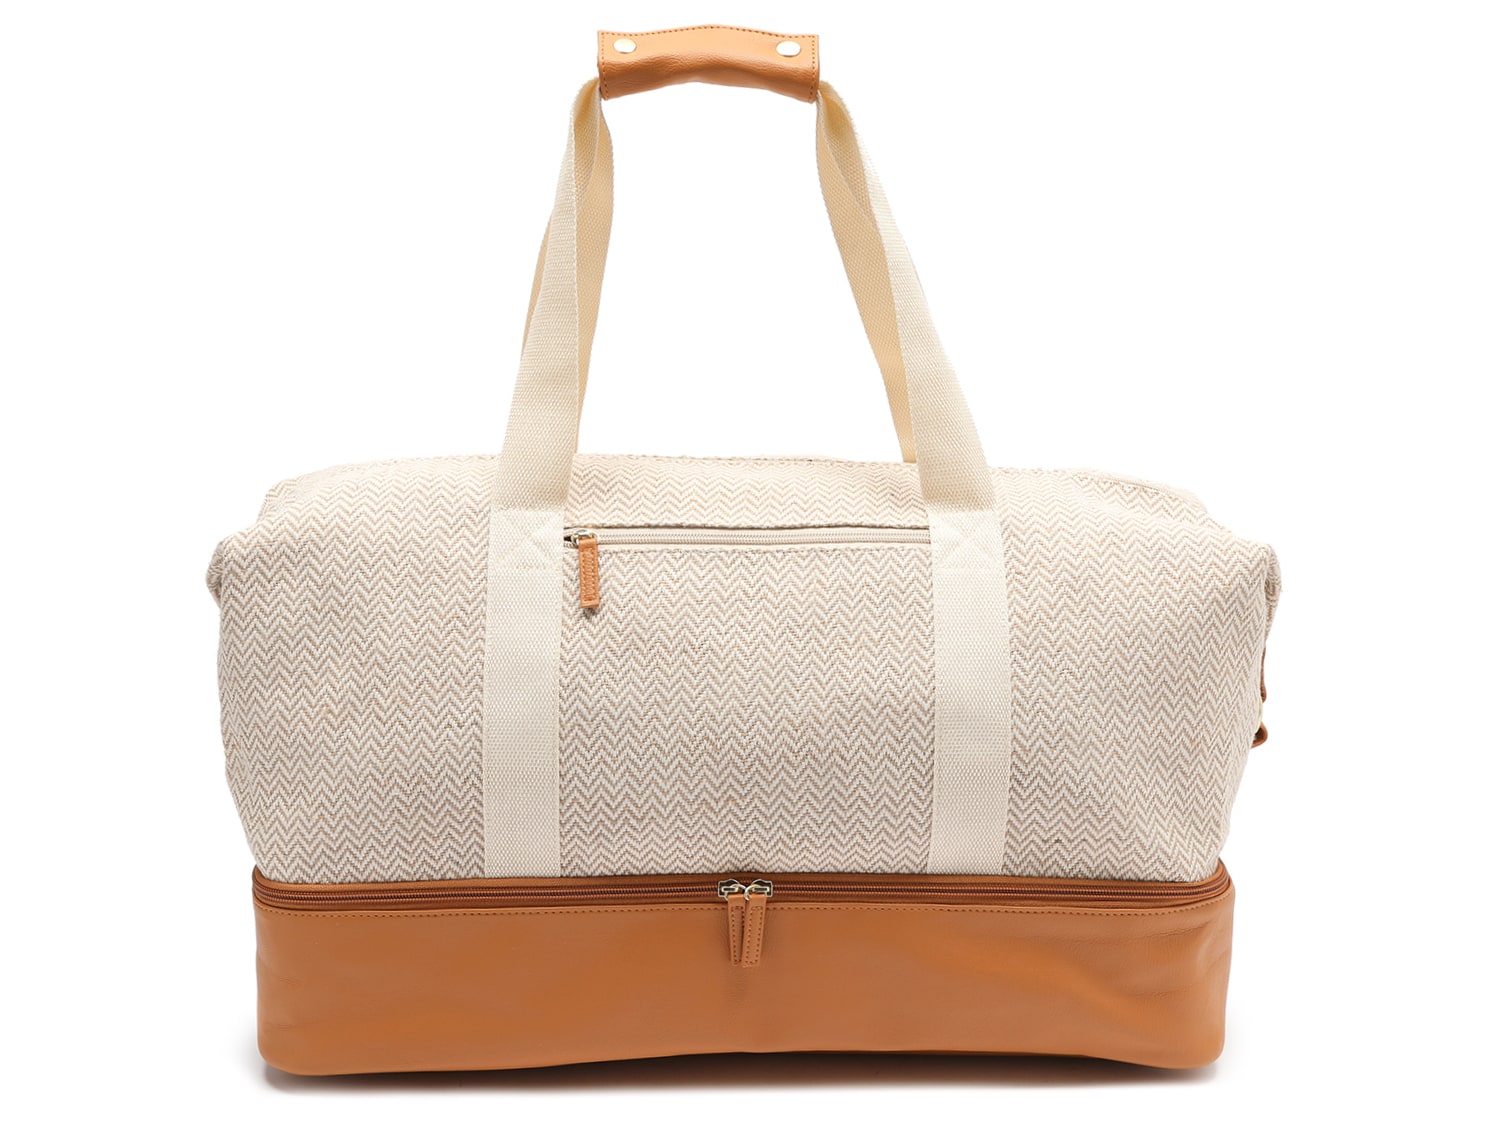 DSW Exclusive Free Cream Weekender Bag Free Shipping DSW